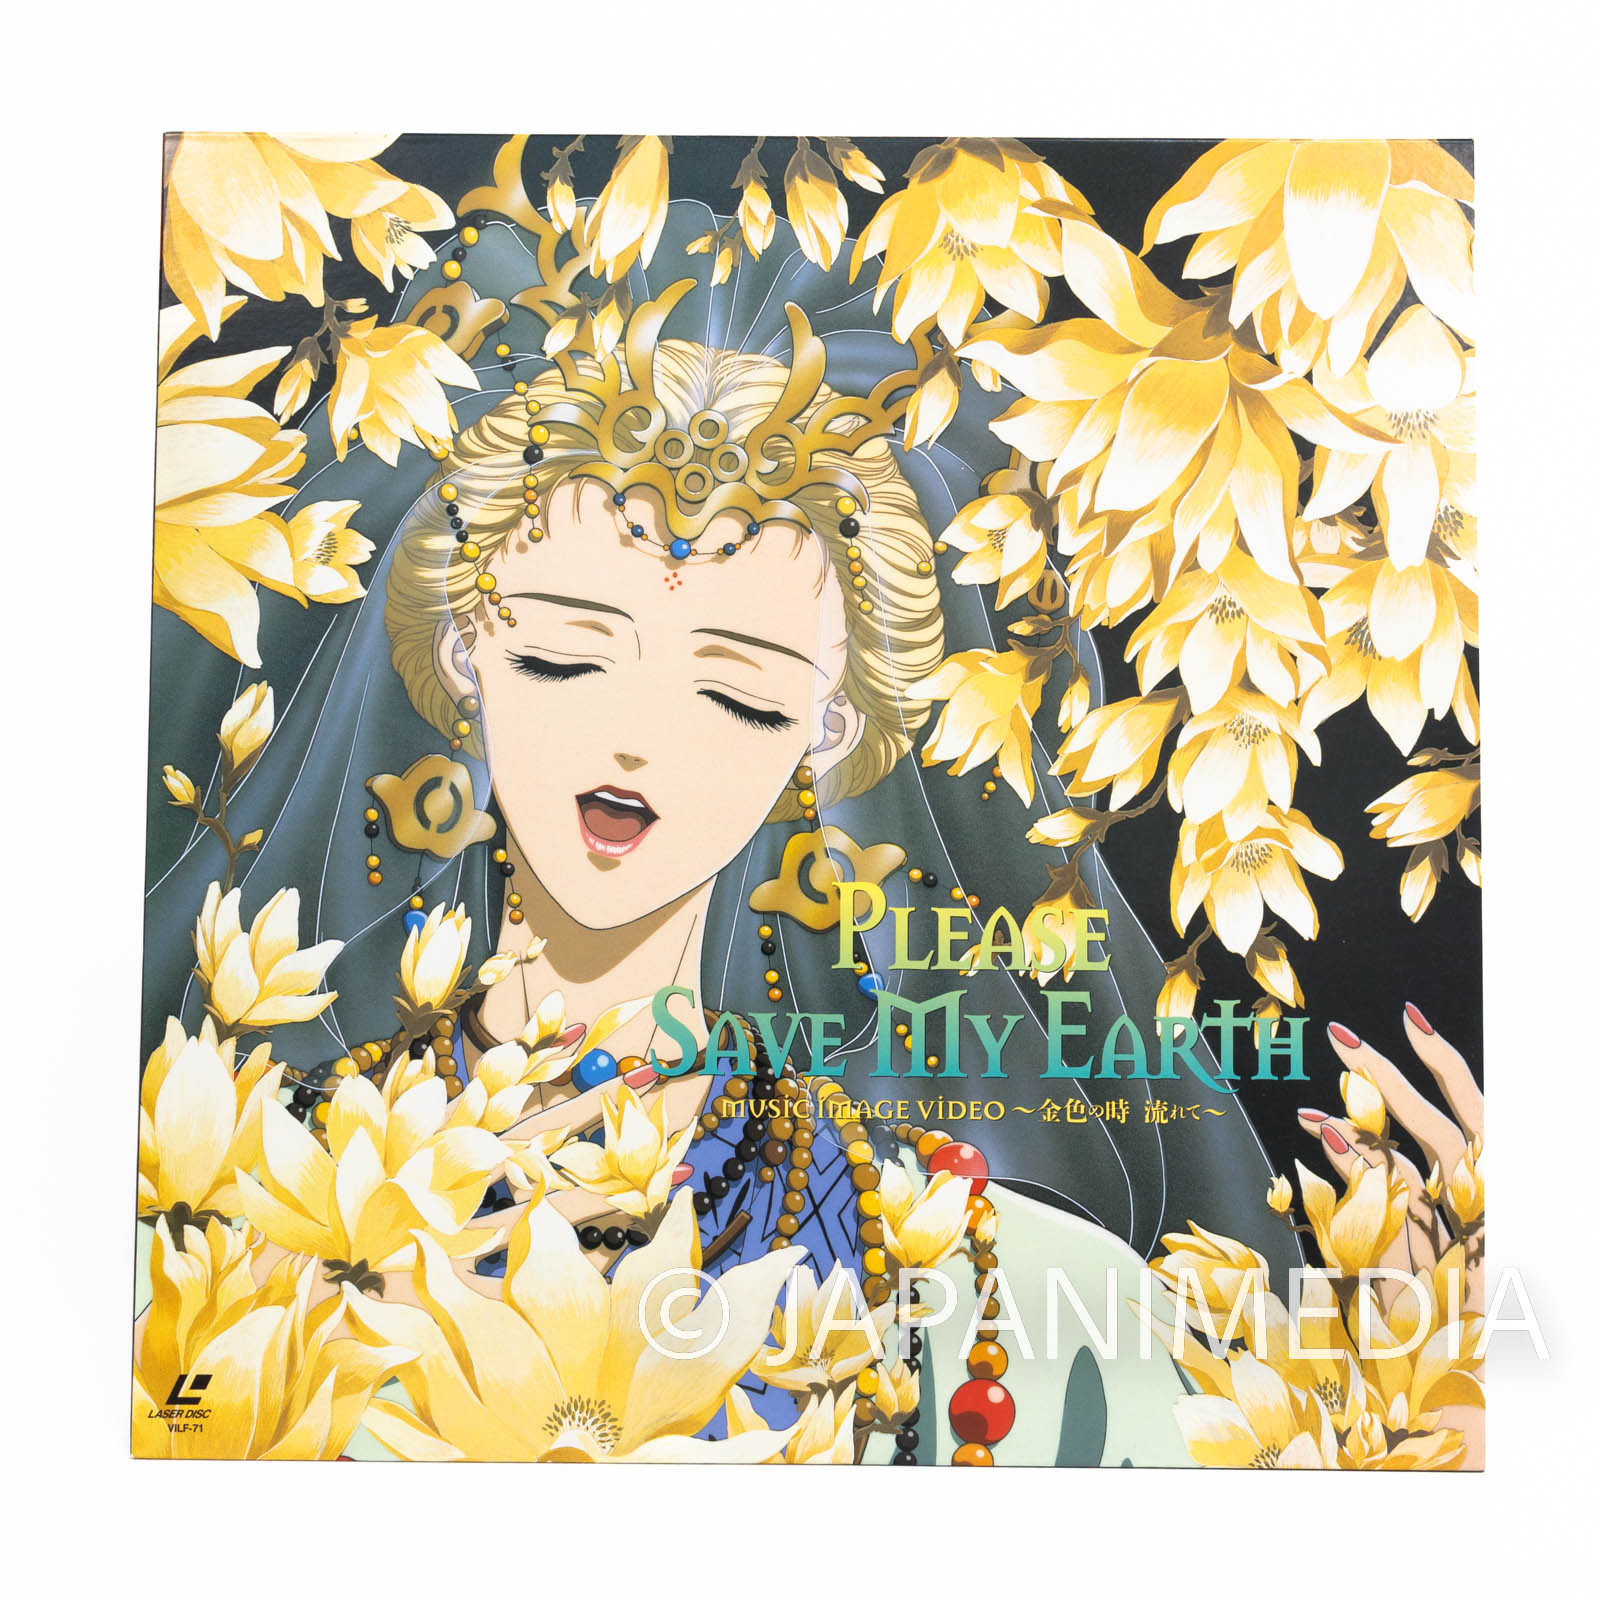 [LD] Please Save My Earth Music image Video - The Passing of the Golden Age - JAPAN ANIME